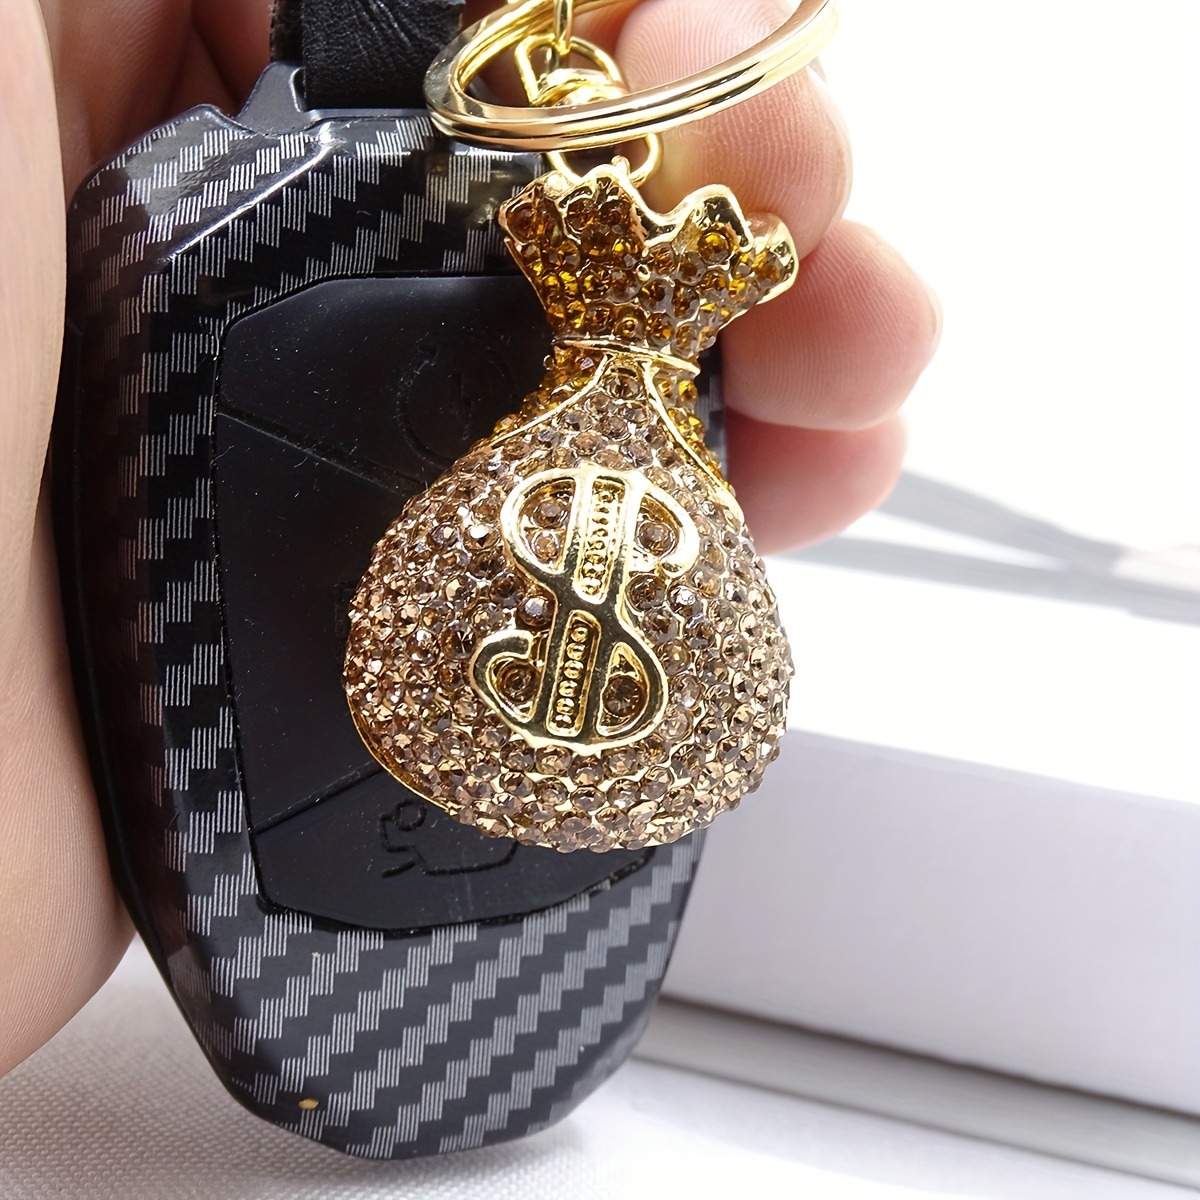 Louis Vuitton FORTUNE COOKIE BAG CHARM & KEY HOLDER Extremely